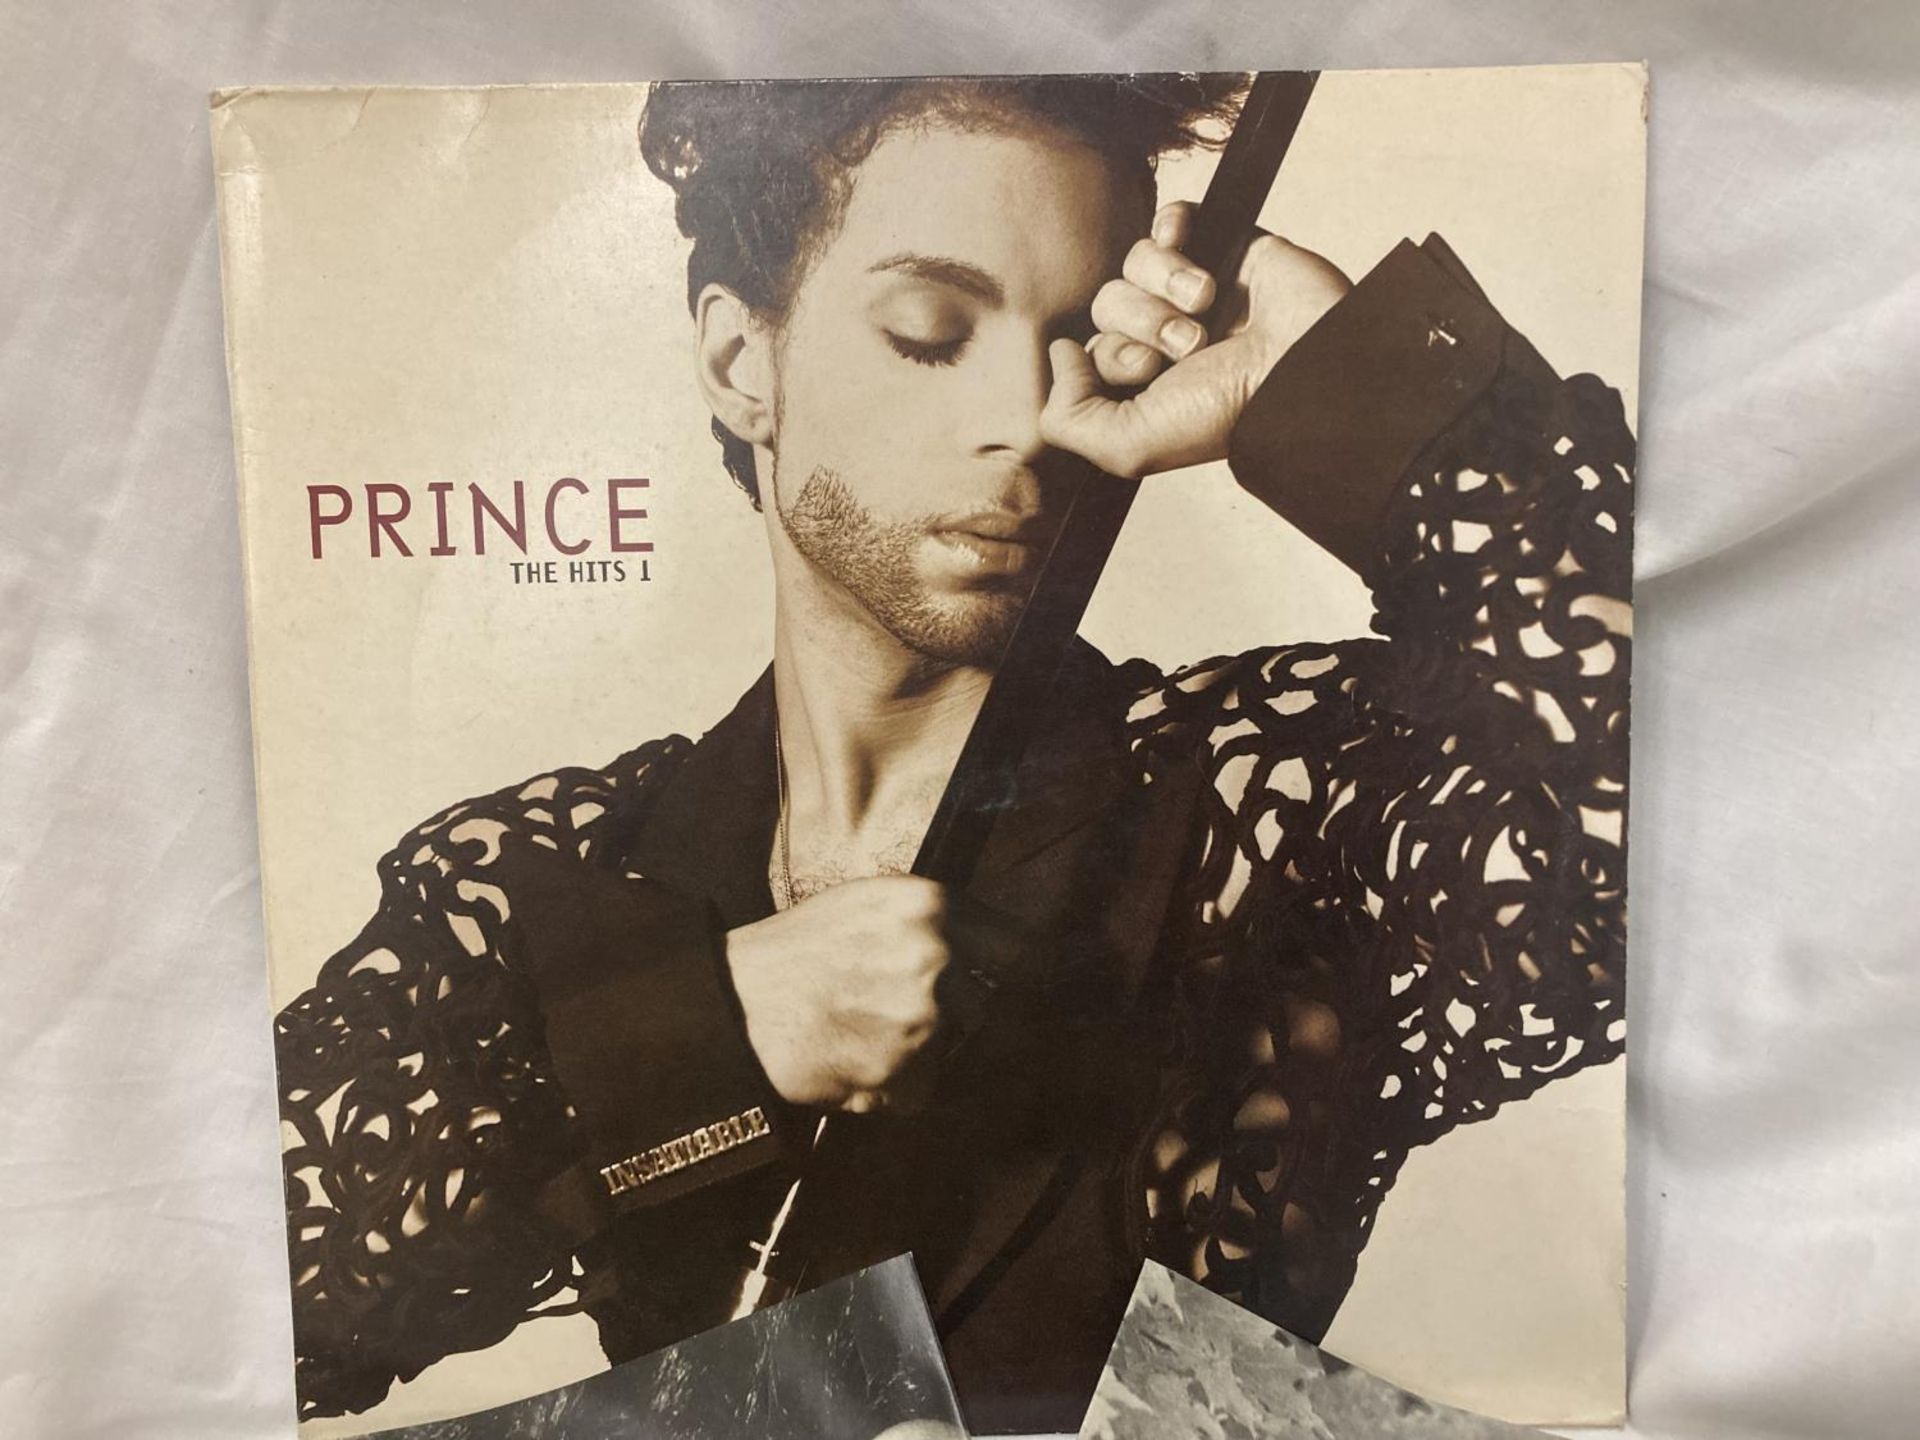 A FIRST PRESSING OF PRINCE - THE HITS VOLUMES 1 AND 2 ON VINYL - Image 2 of 7